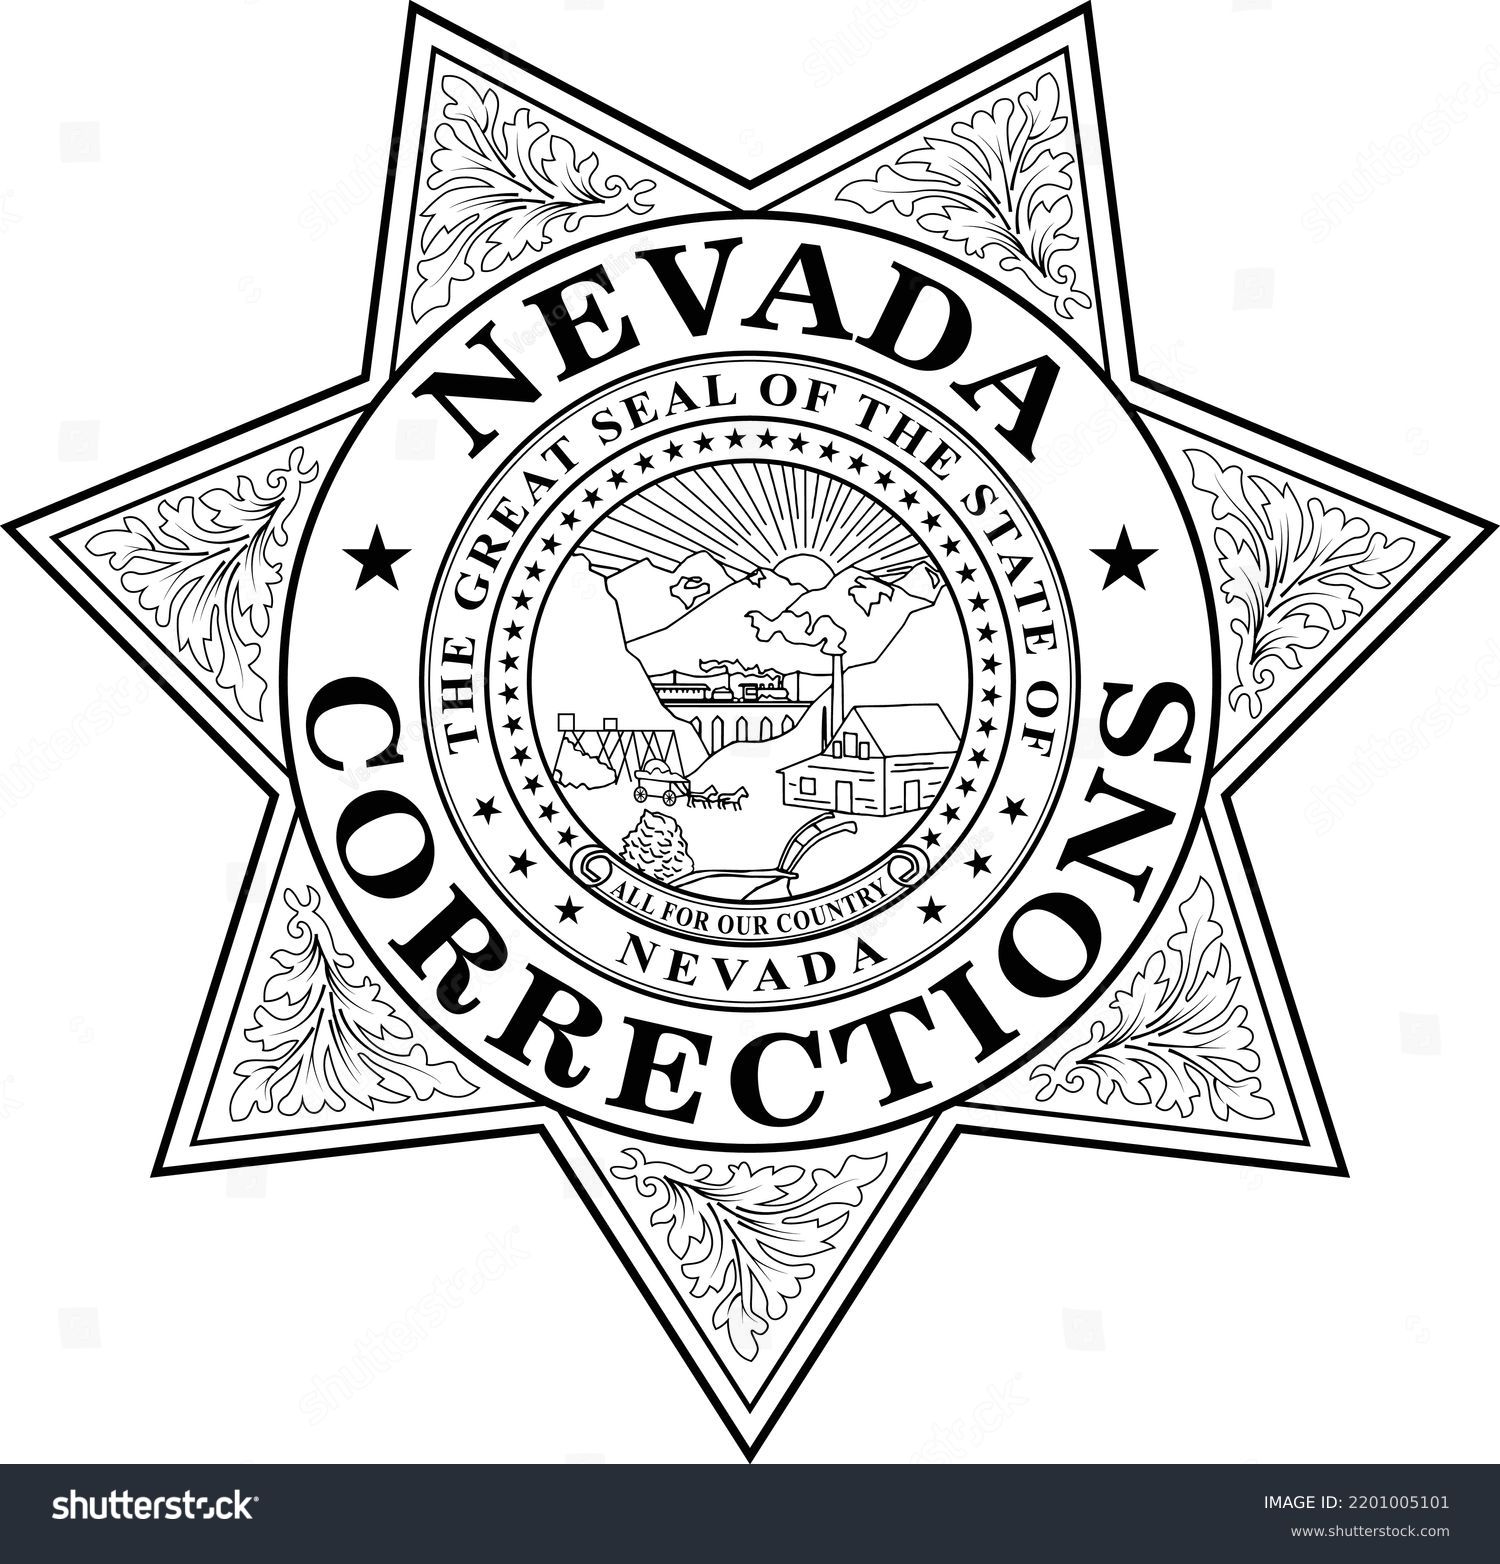 SVG of Nevada Corrections Badge Vector Black Line art 7 Pointed Star Patch svg